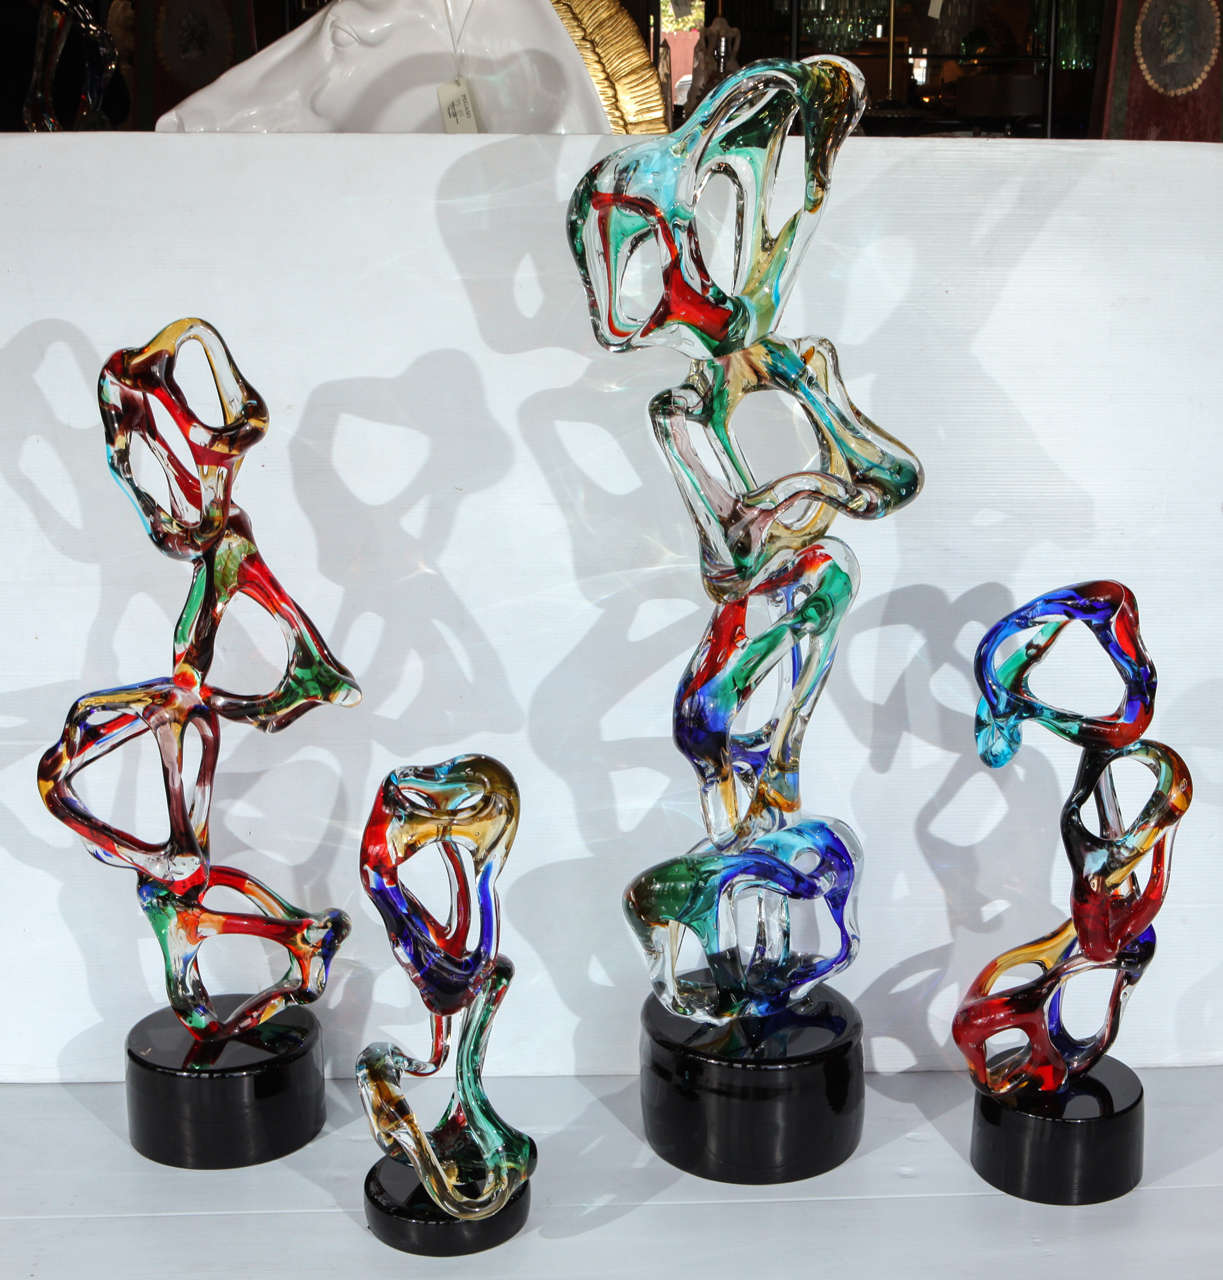 Abstract Set of 4 Italian Sculptures
Hand blown in Venice by Sergio Costantini (with original Murano sticker and a signature)
Dimensions (in the order from largest to smallest):
51.5